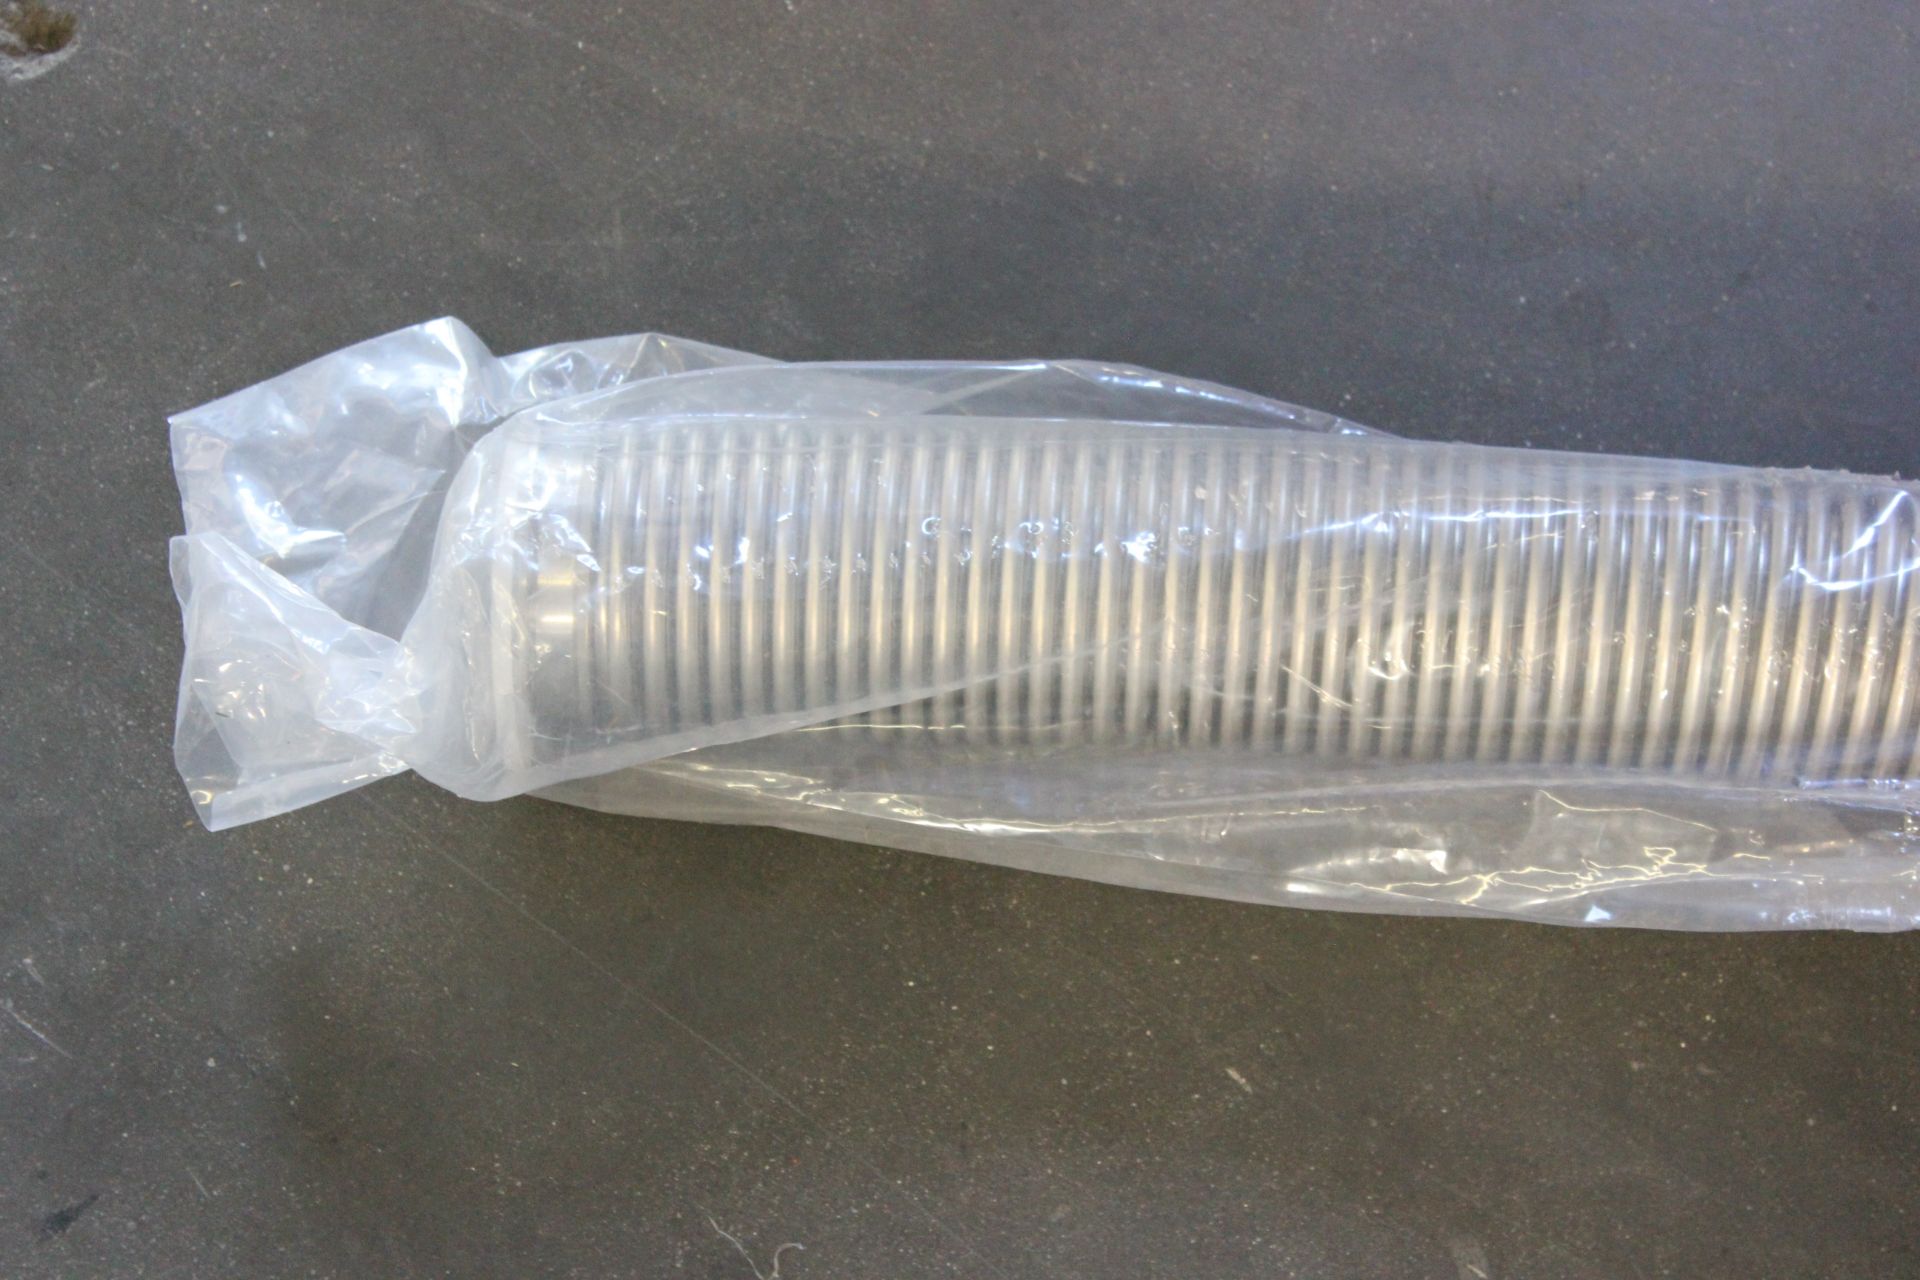 NEW MISUMI SS HIGH VACUUM FLEXIBLE BELLOWS HOSE TUBE - Image 5 of 11